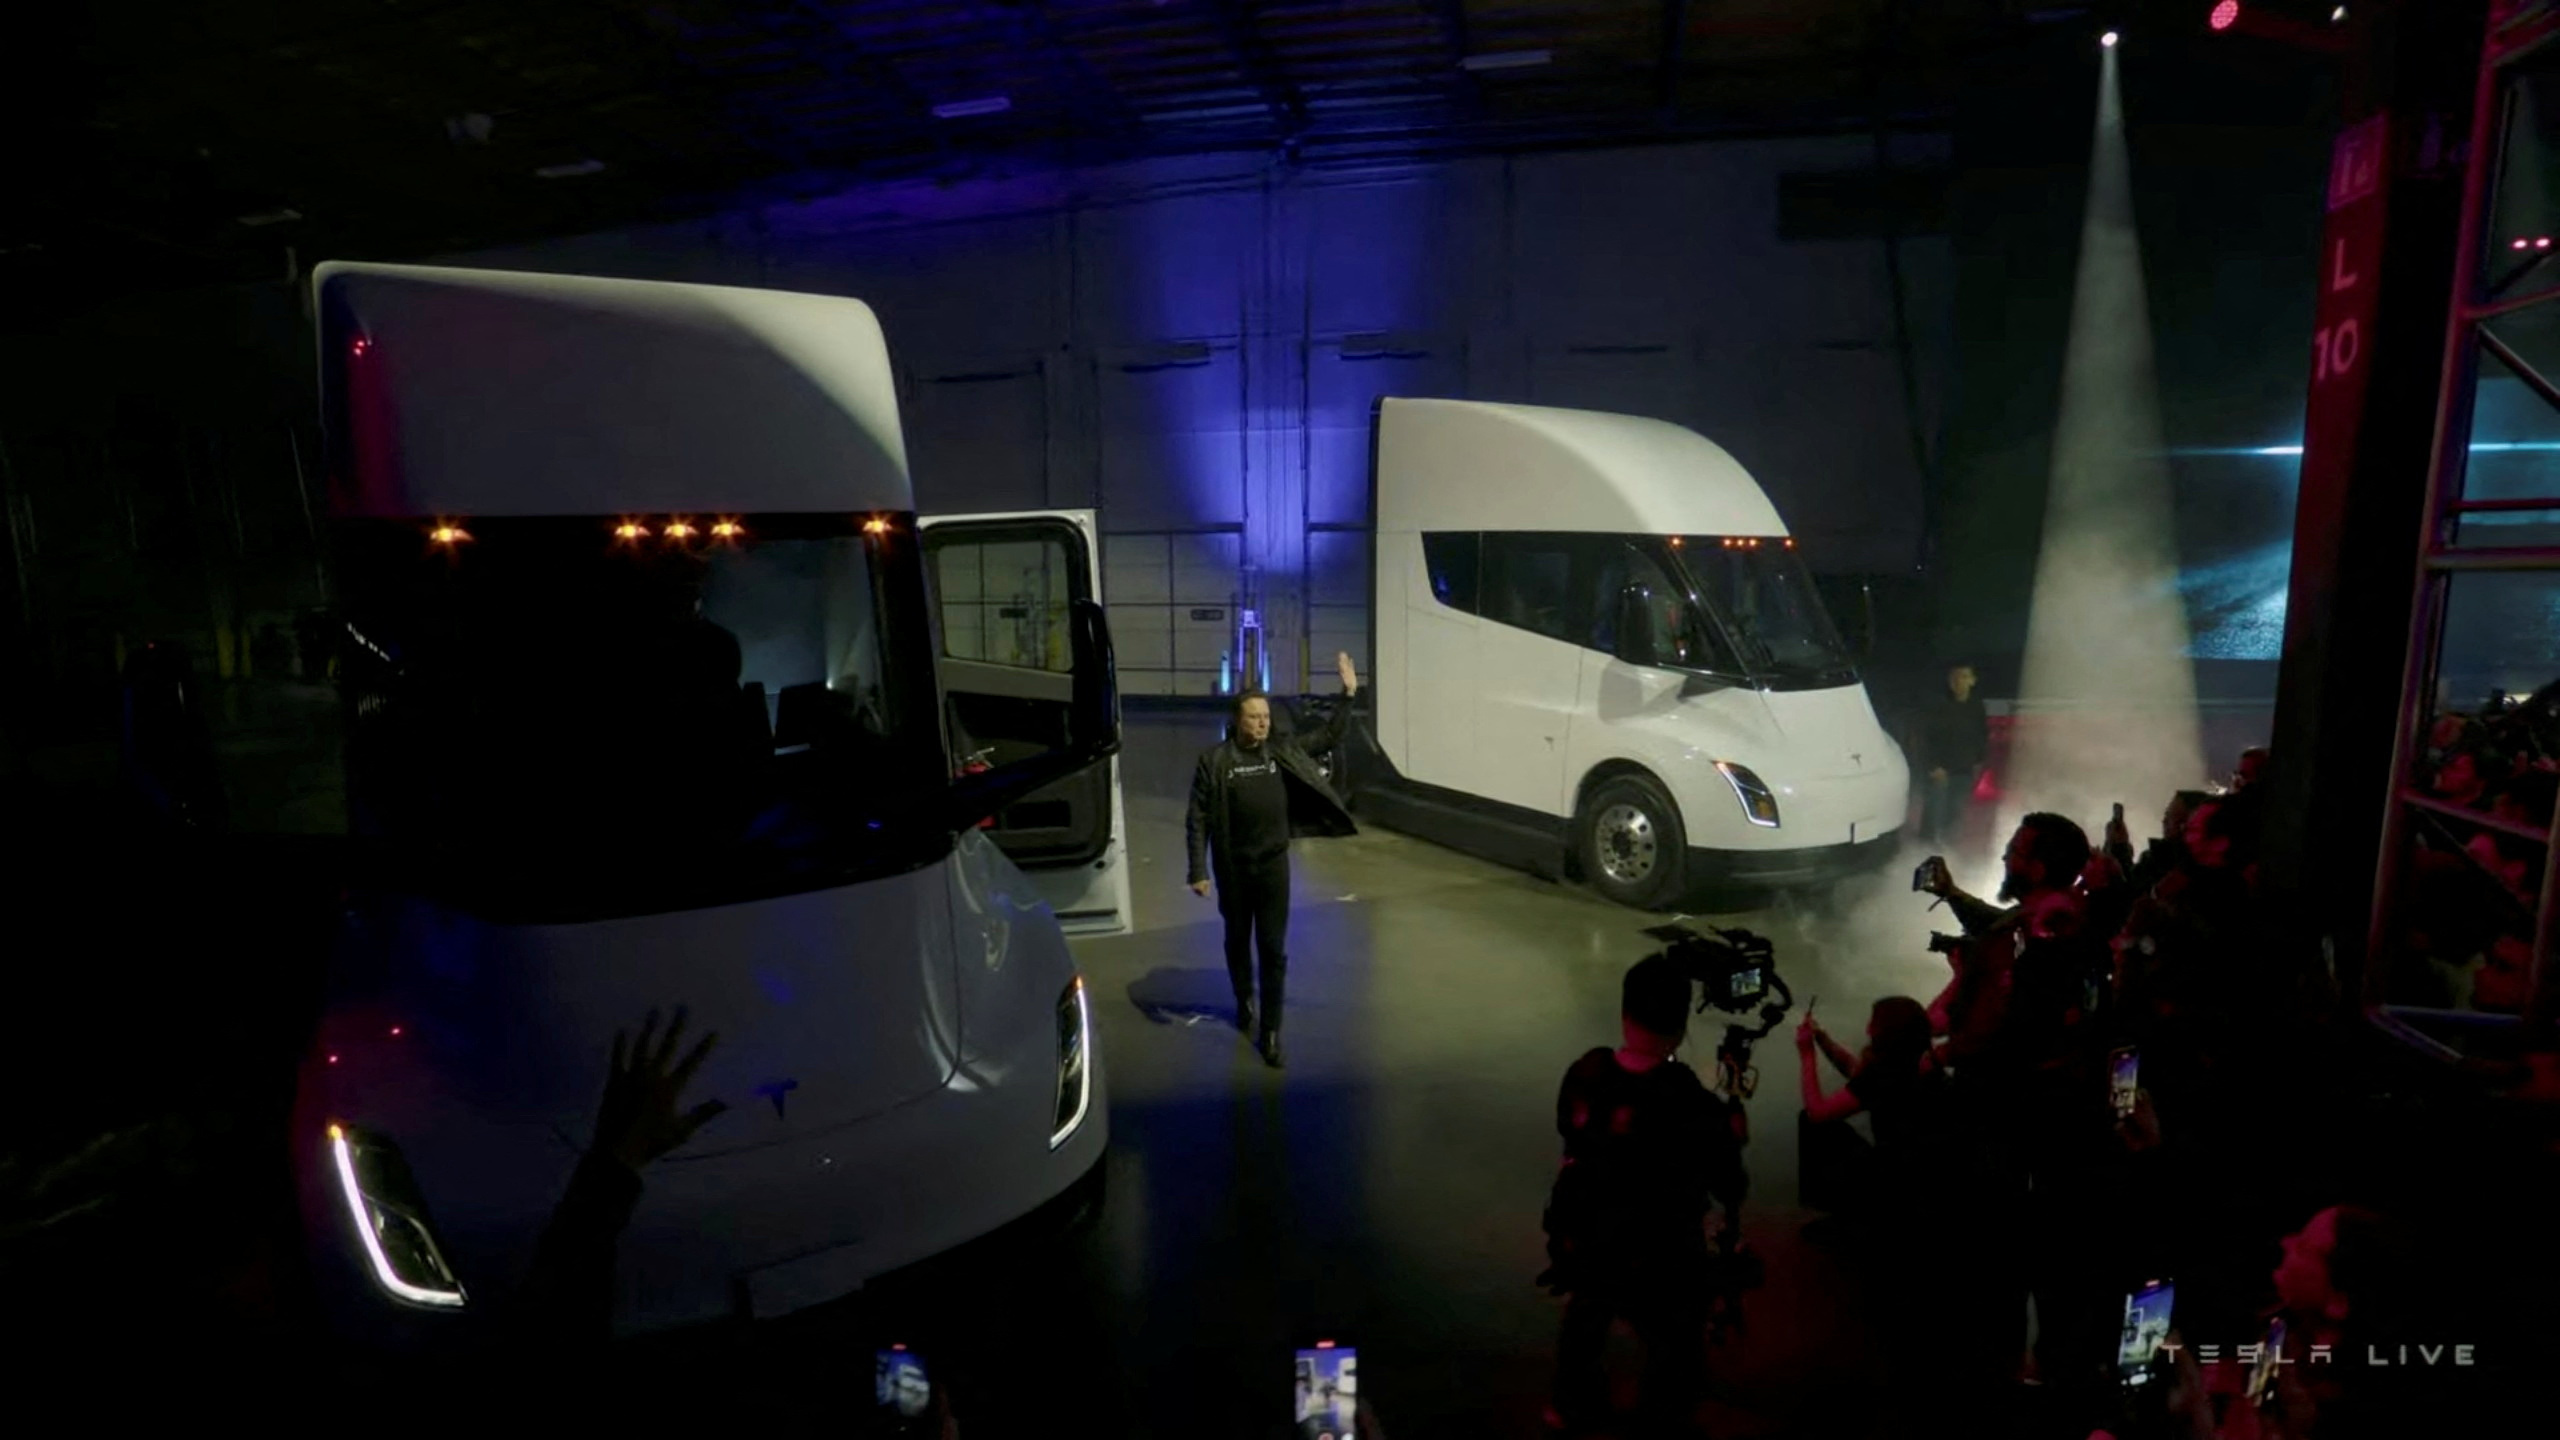 Tesla Unveils Semi Truck at Live Streaming Event